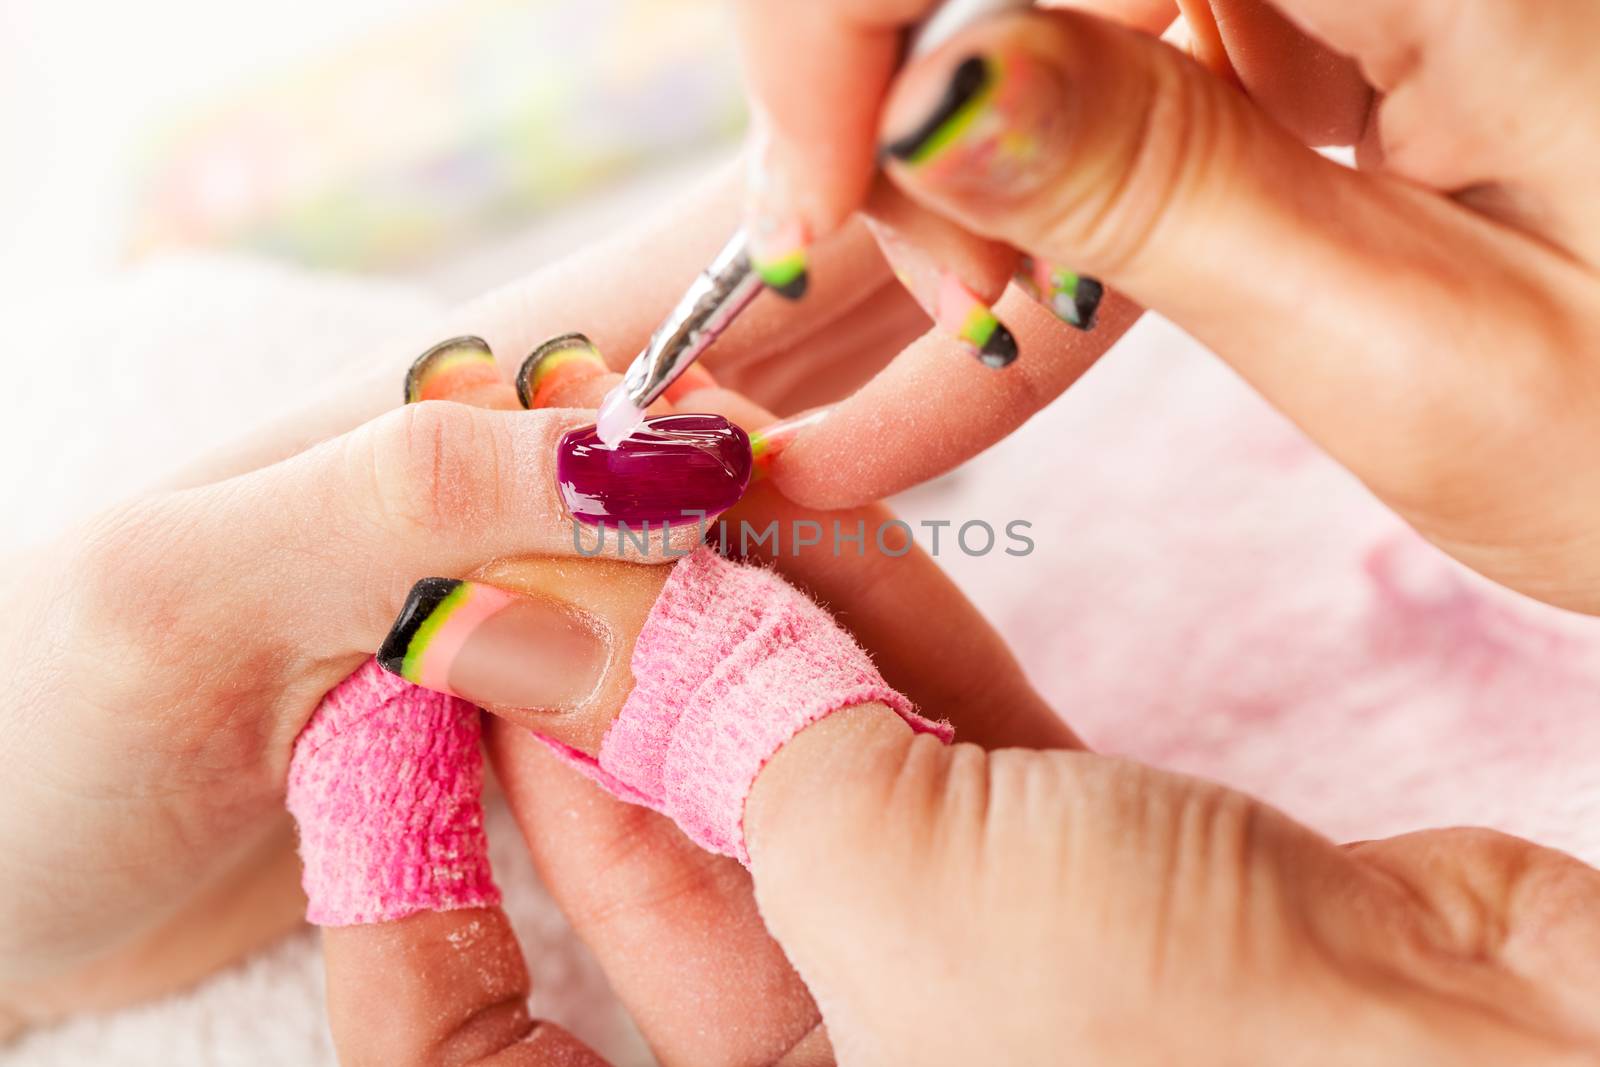 Manicure by MilanMarkovic78